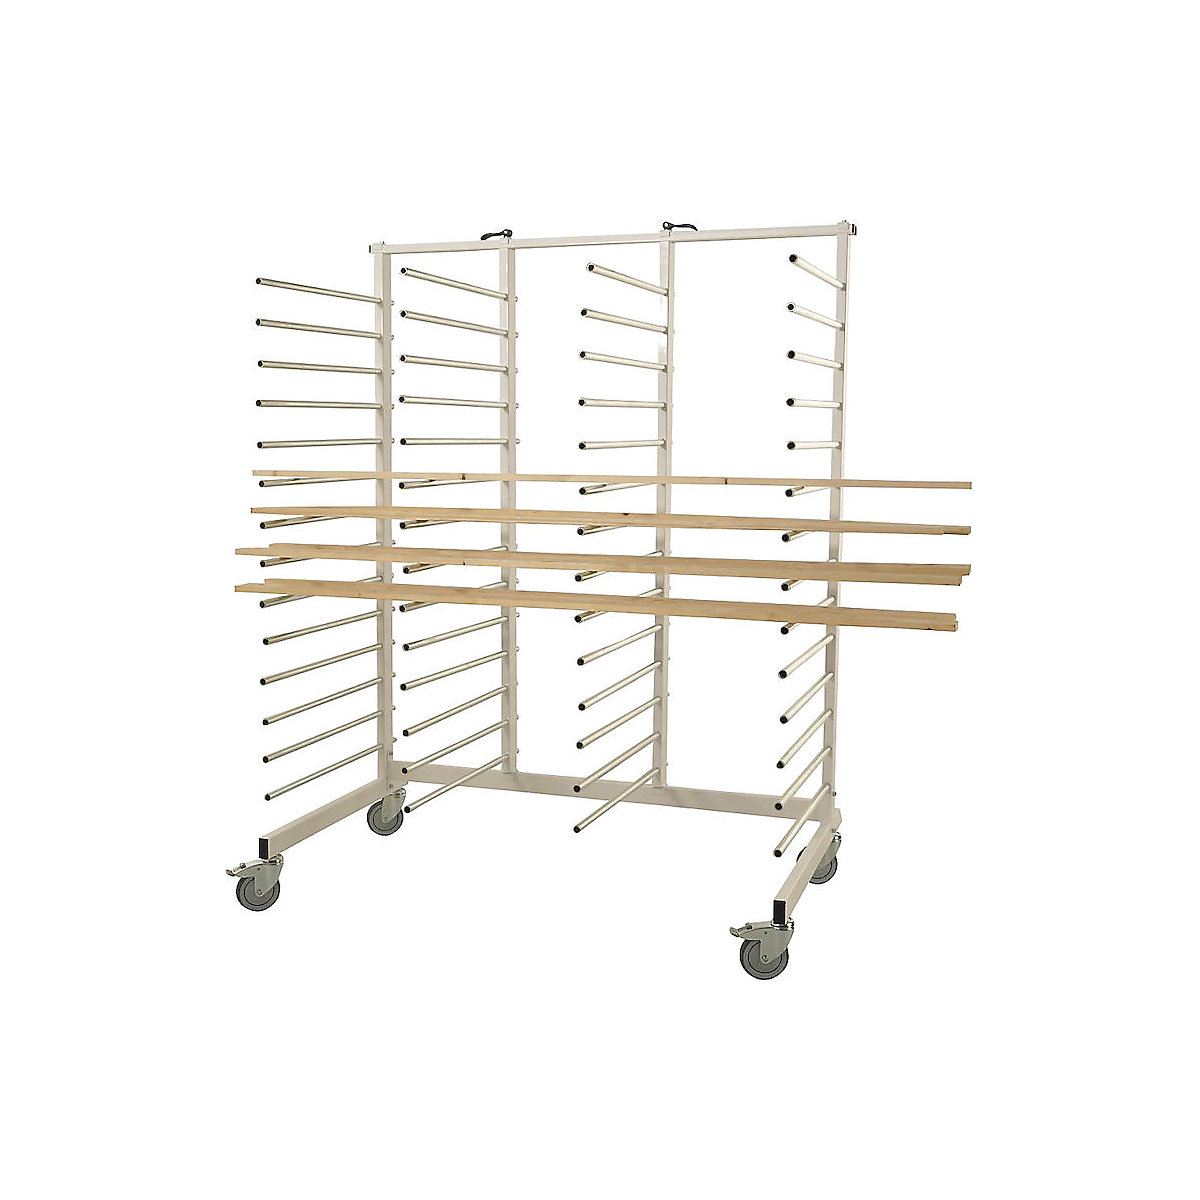 Cira cantilever trolley, one side